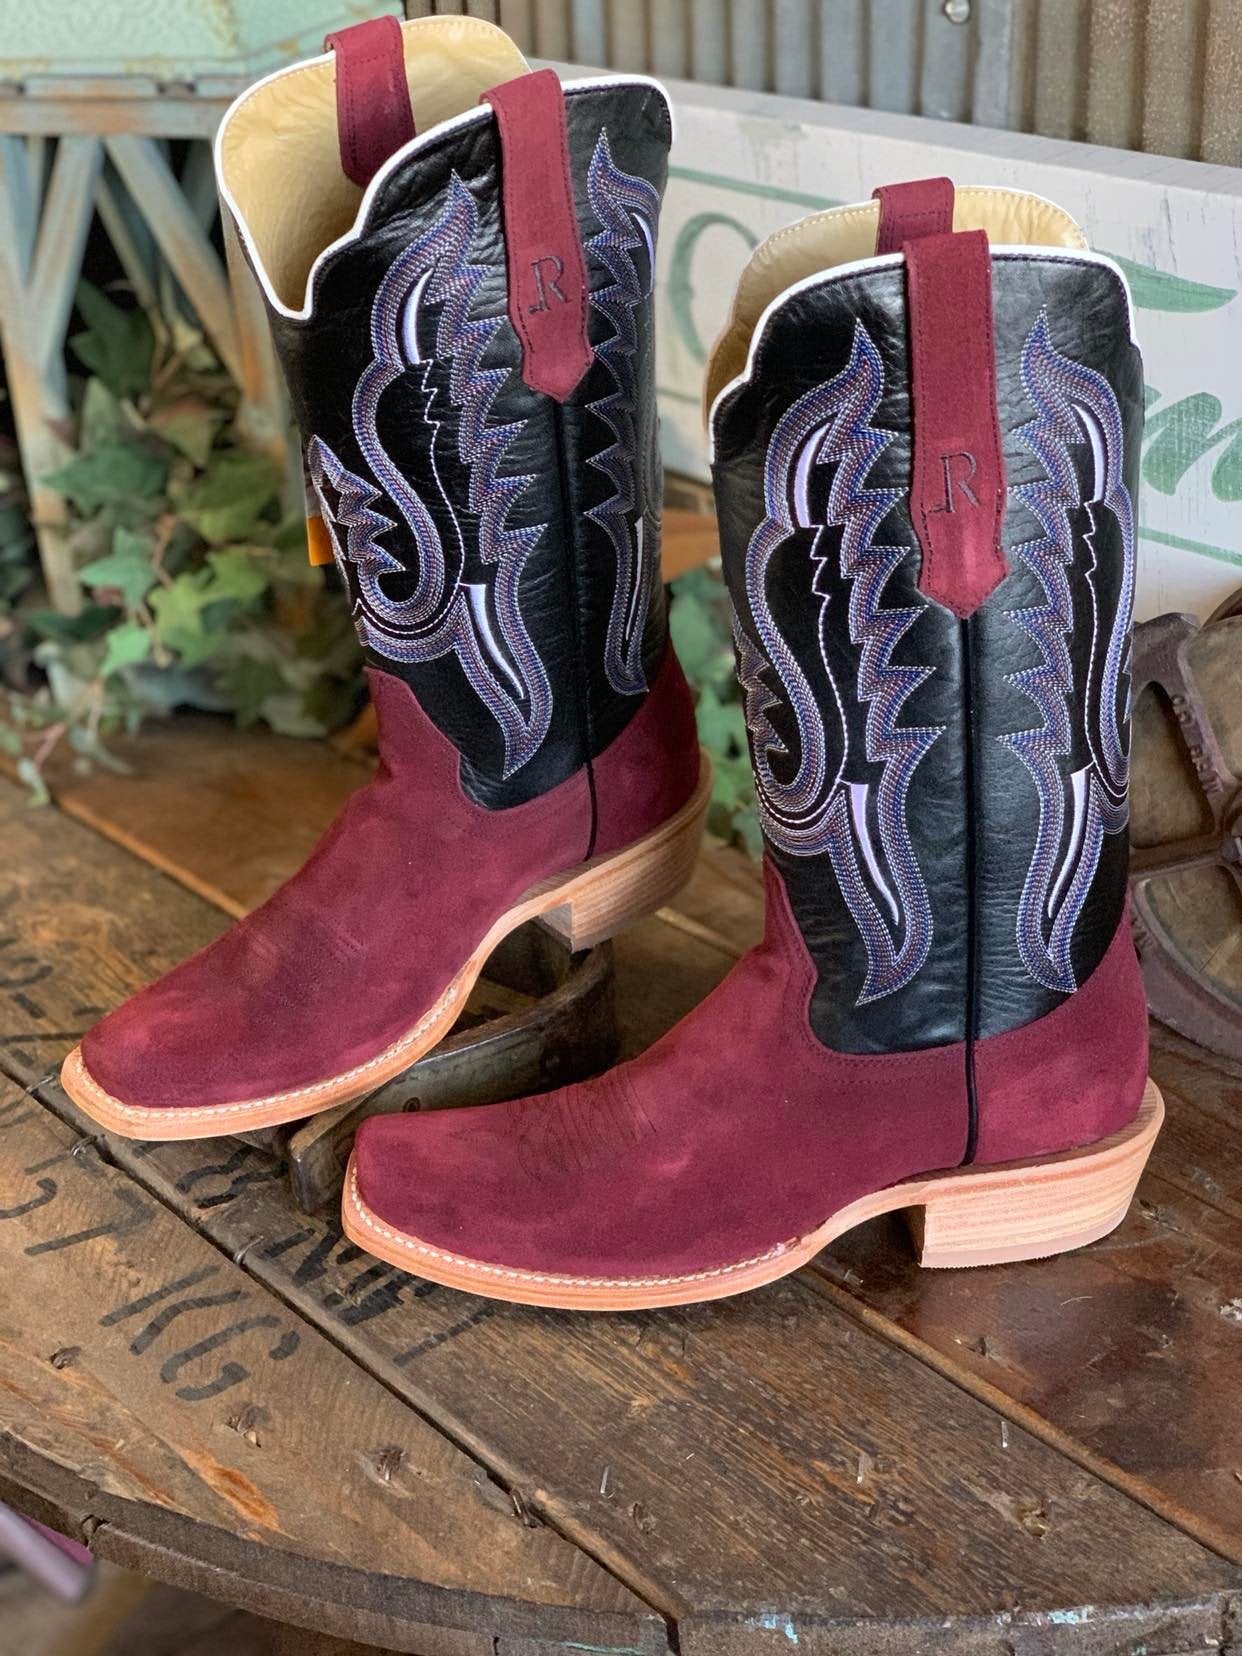 R. Watson Mens Rubar Rough out & Black Sinatra Cowhide Boots-Men's Boots-R. Watson-Lucky J Boots & More, Women's, Men's, & Kids Western Store Located in Carthage, MO